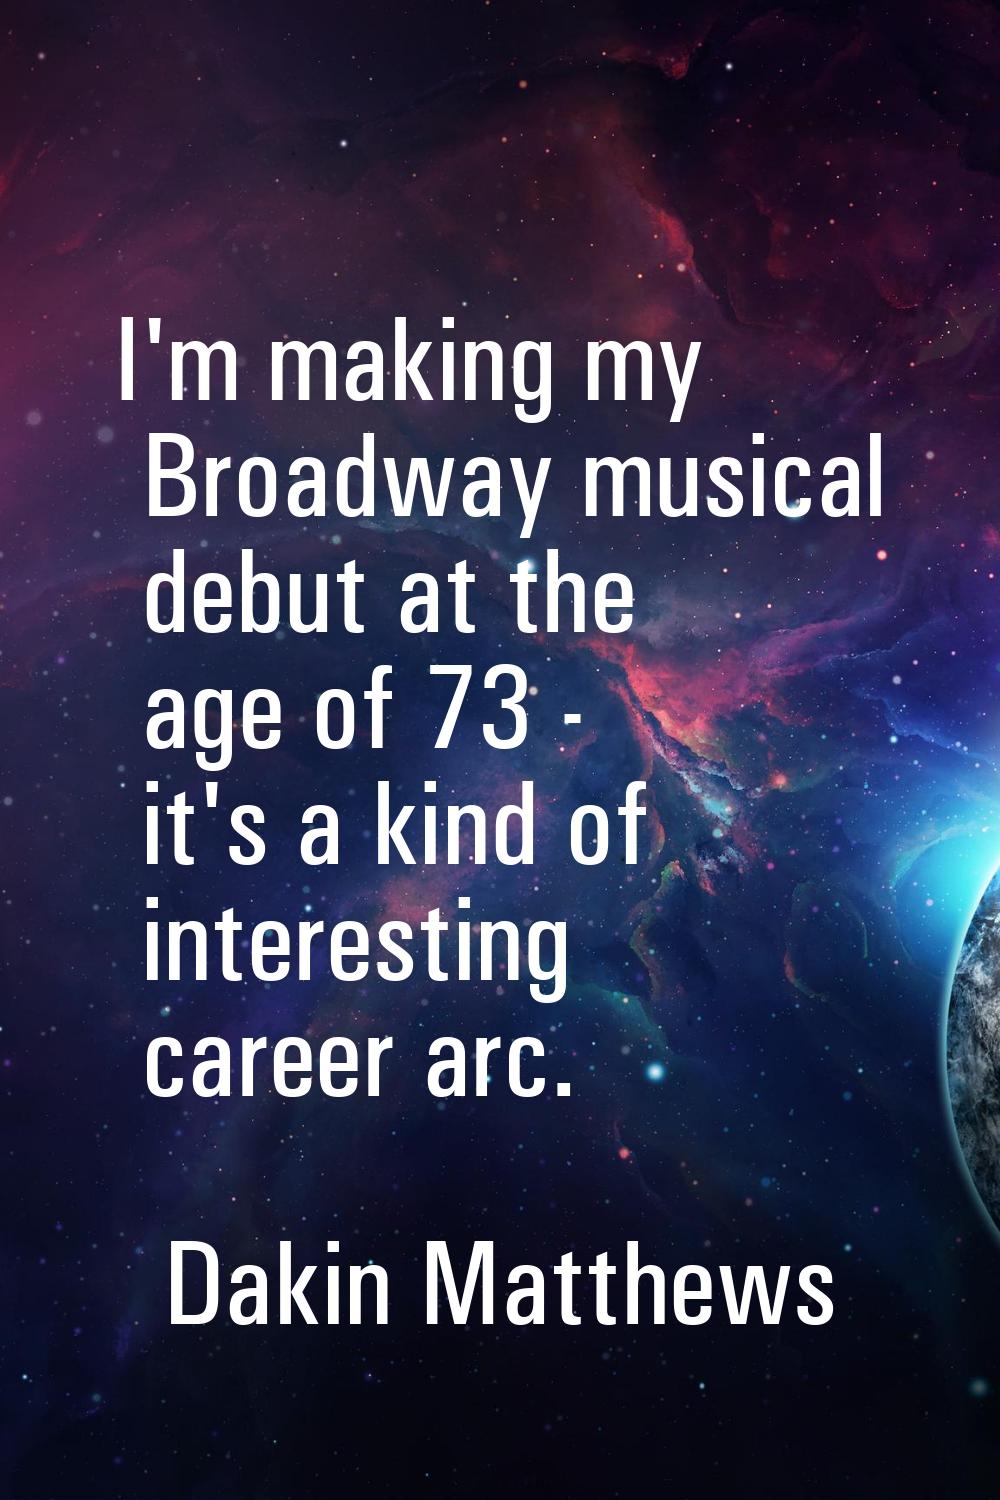 I'm making my Broadway musical debut at the age of 73 - it's a kind of interesting career arc.